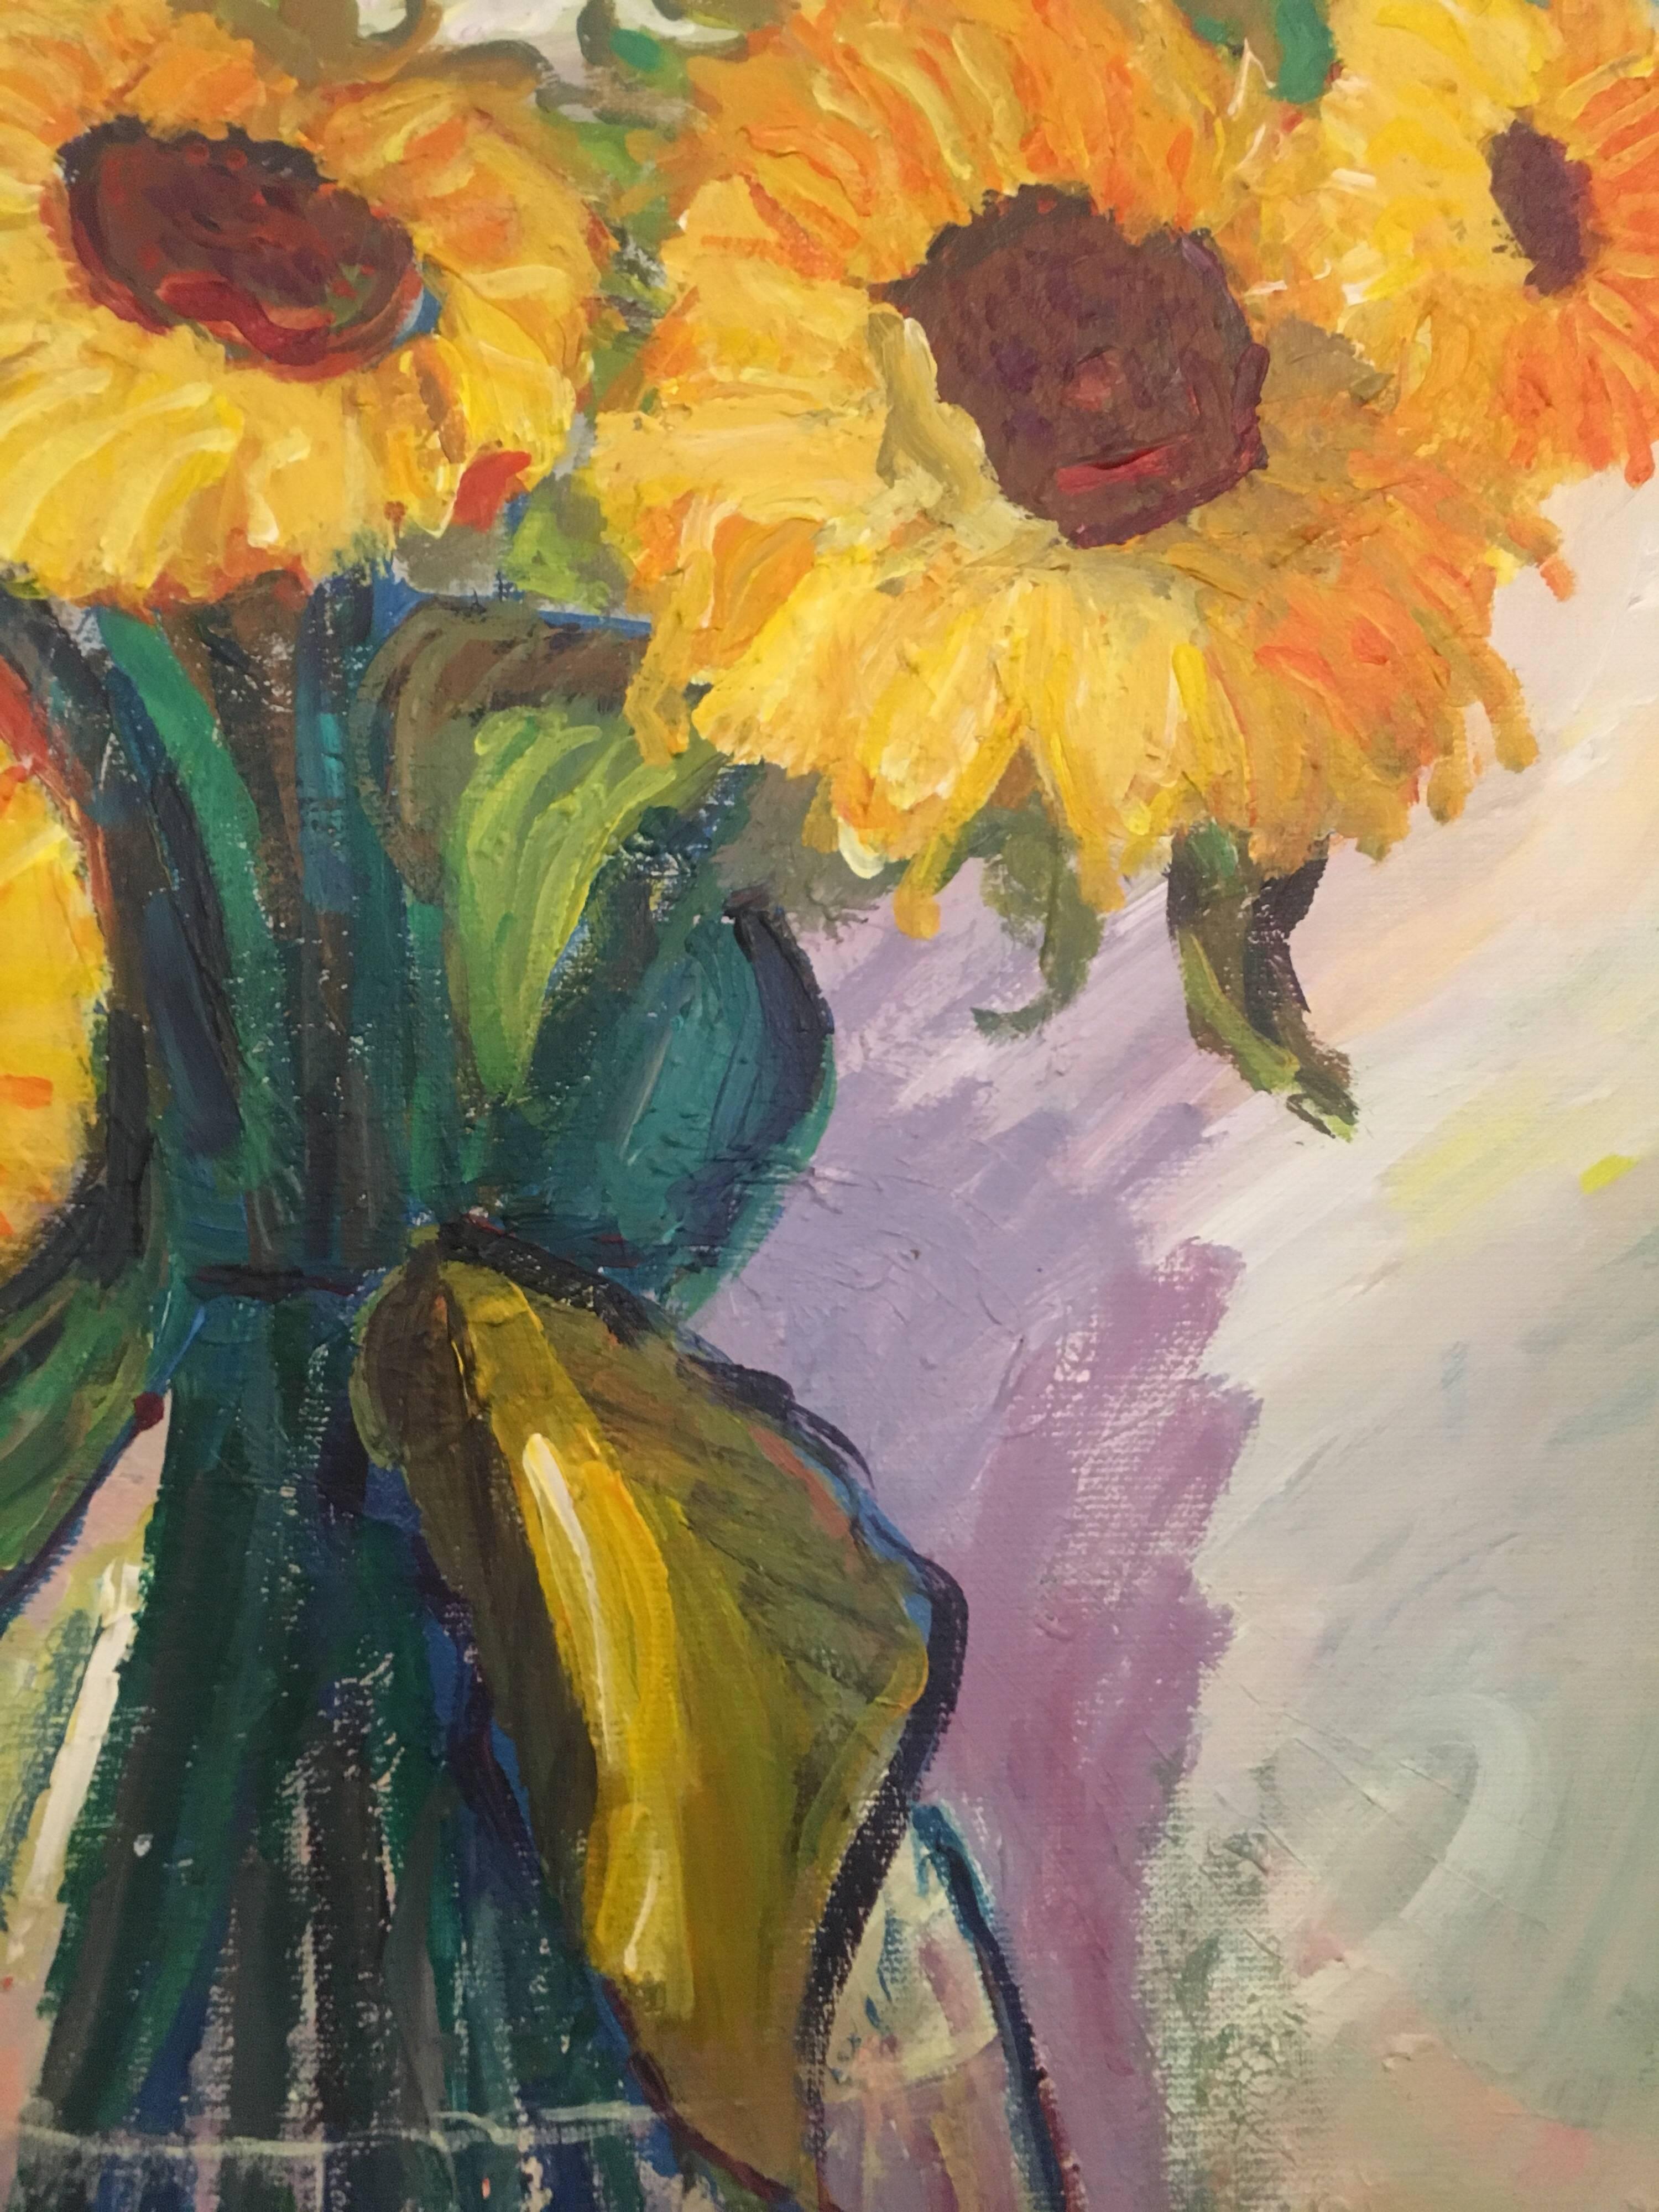 Sunflowers in a Vase, Signed Oil Painting
by Pamela Cawley, British 20th century
oil painting on canvas, unframed

canvas: 21.5 x 18 inches 

Stunning original Impressionist oil painting by the 20th century British artist, Pamela Cawley. The work